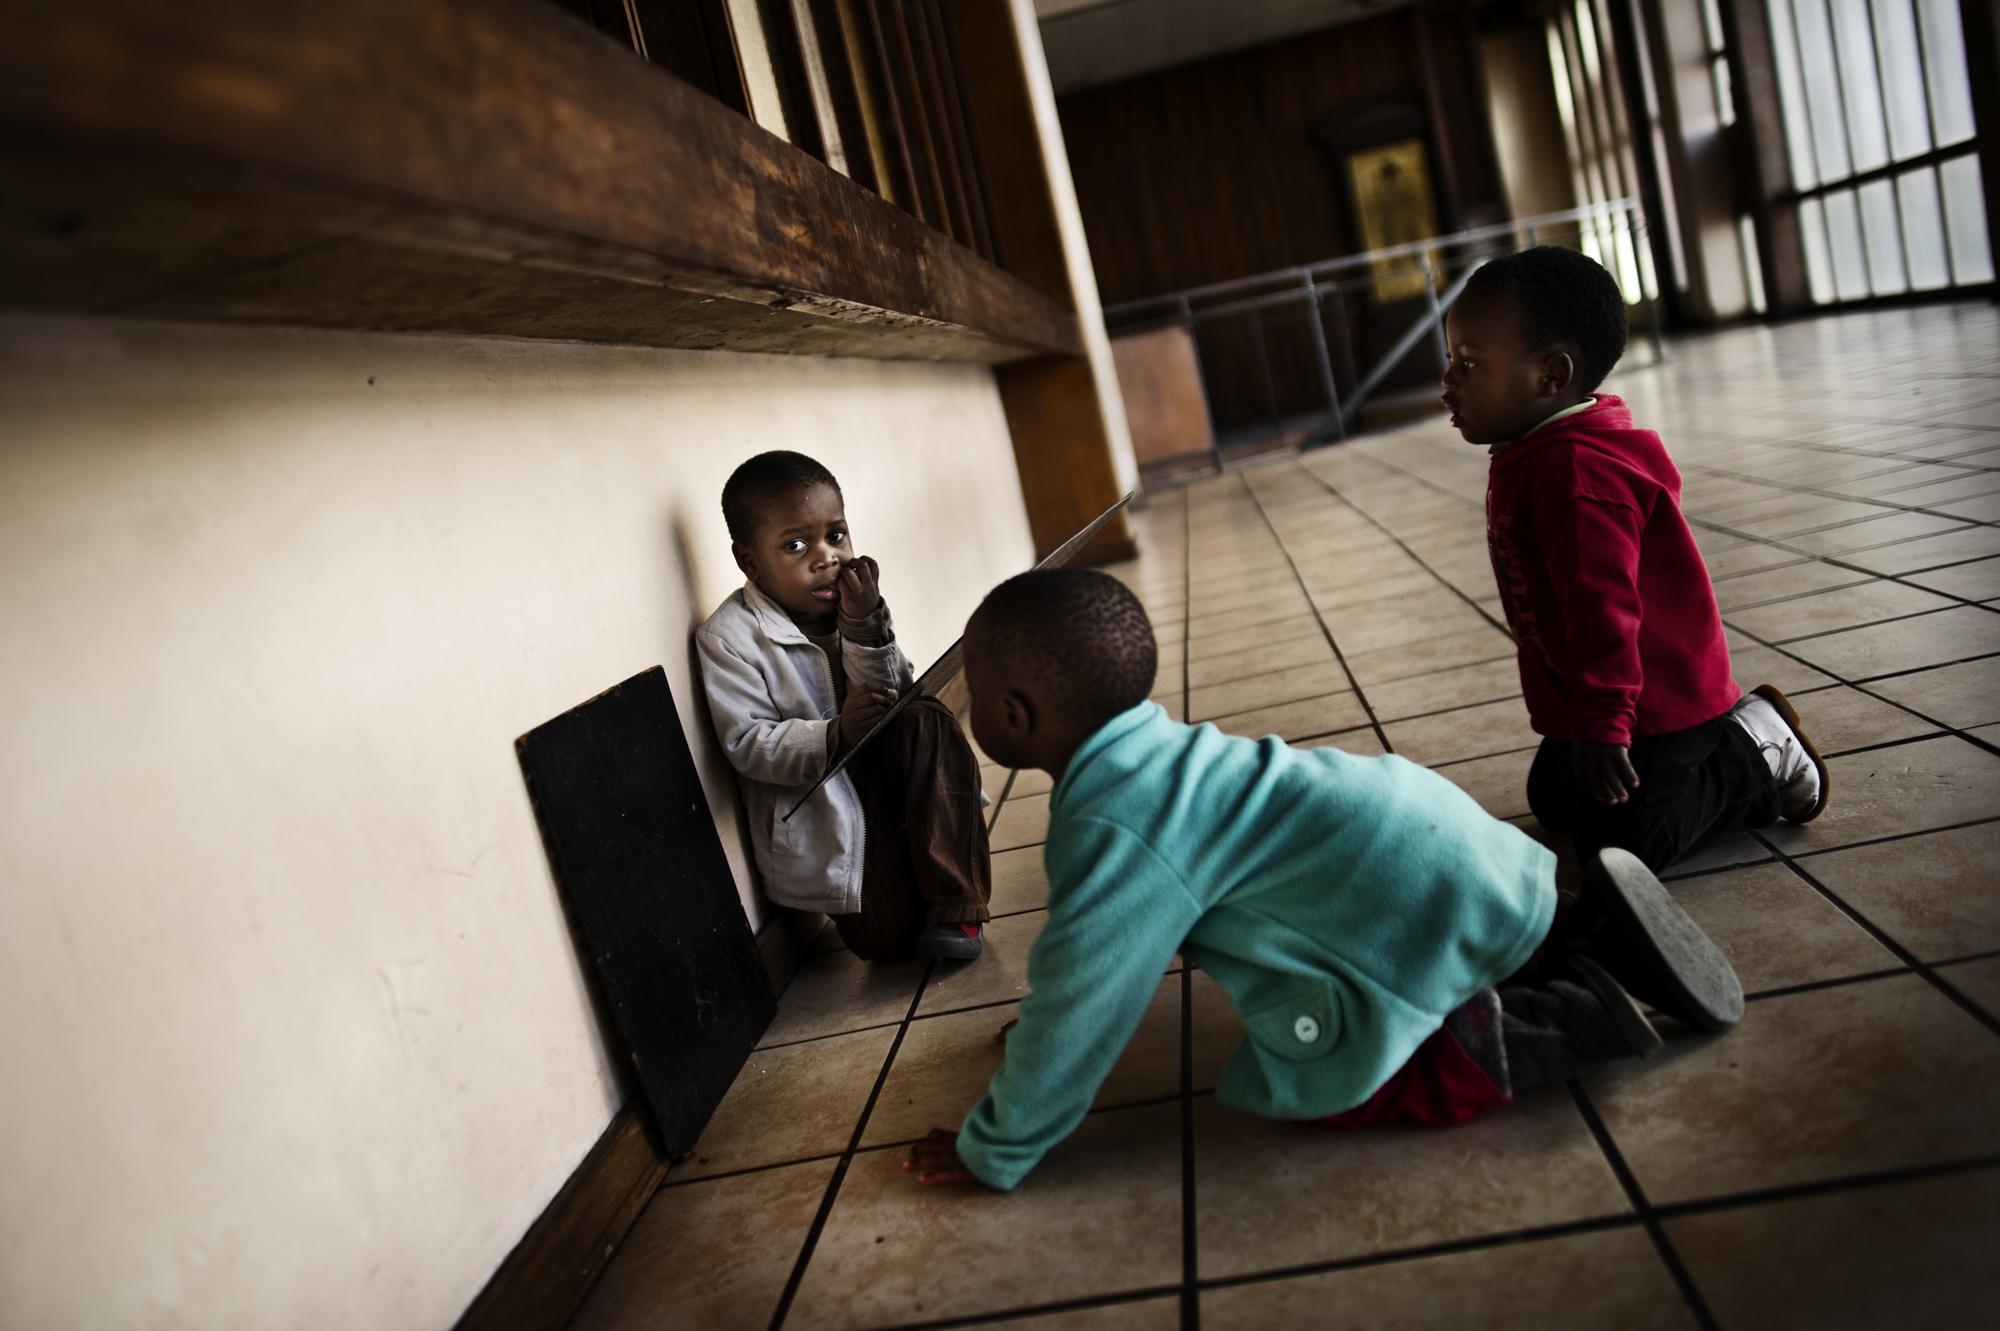 Children of the shadows - Johannesburg, South Africa.June 2012Children playing in...